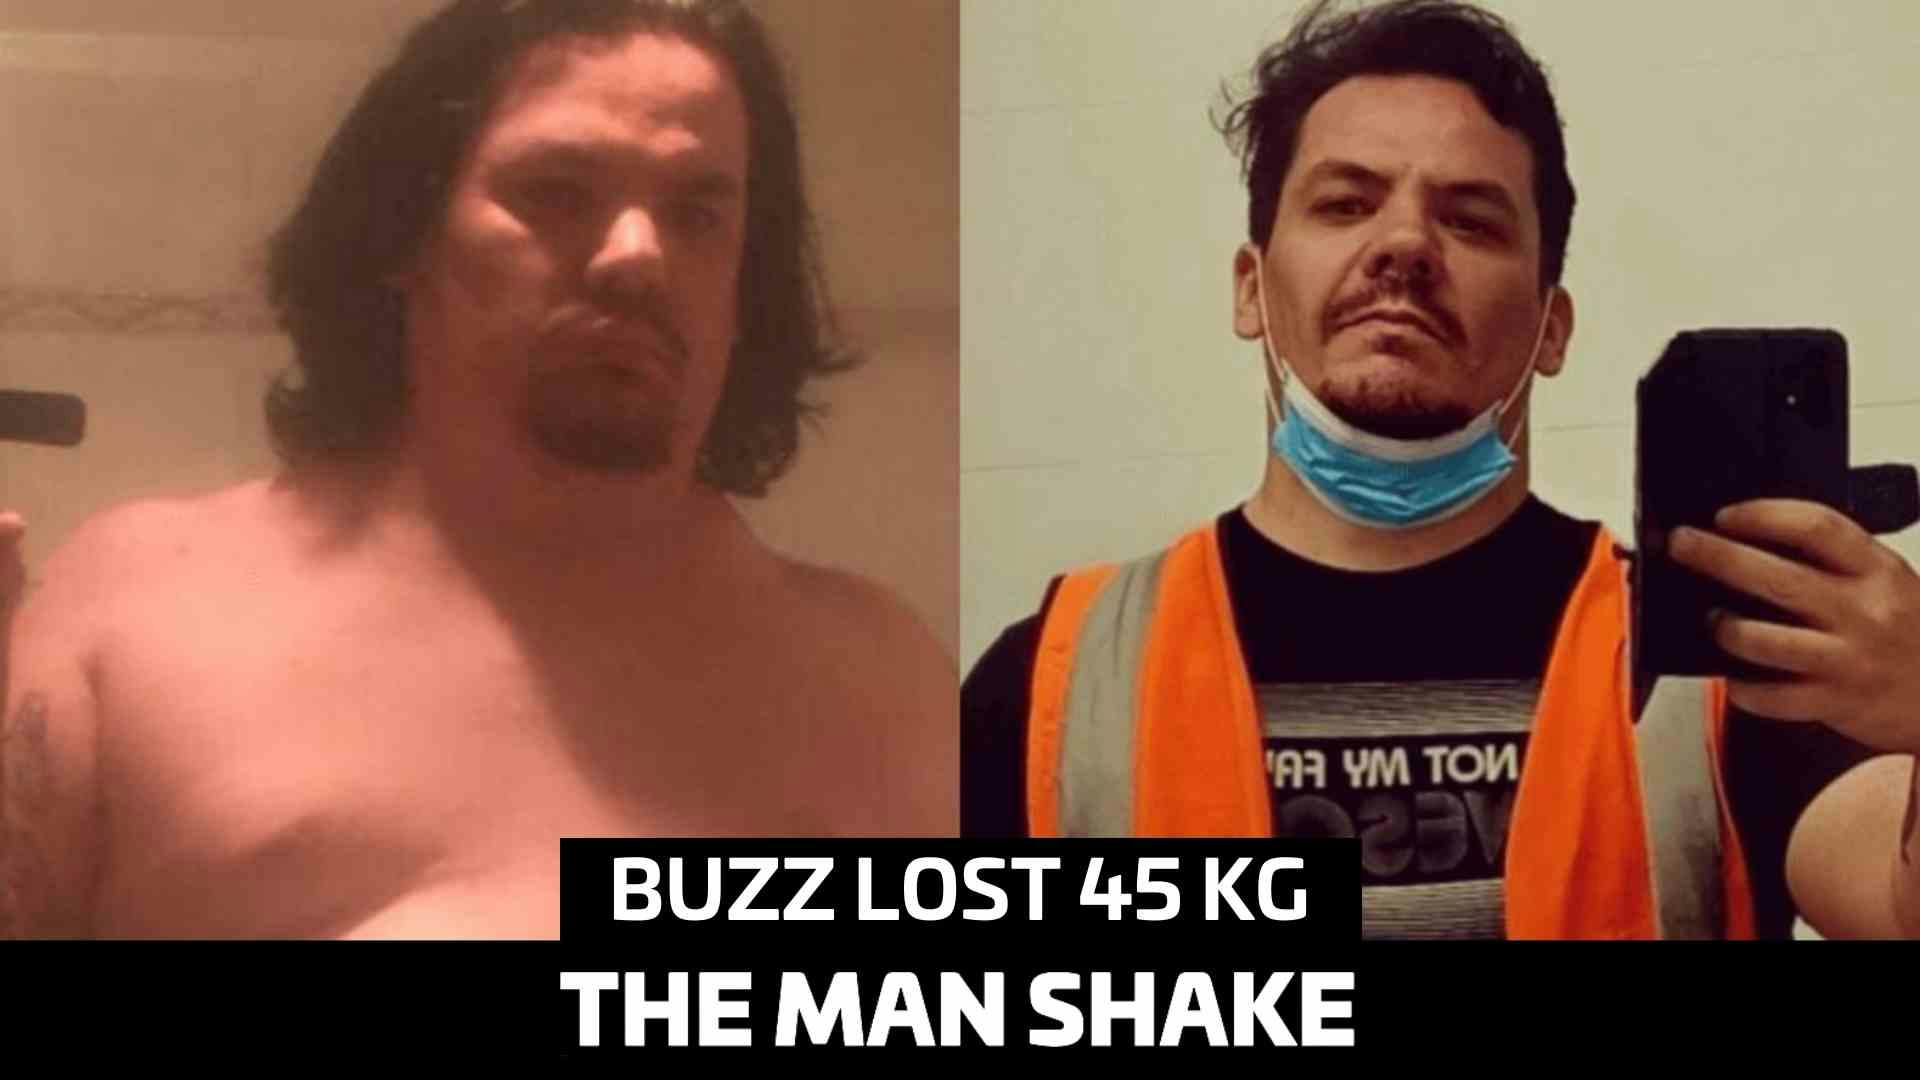 Buzz wanted to be there for his kids so he lost 45kg!